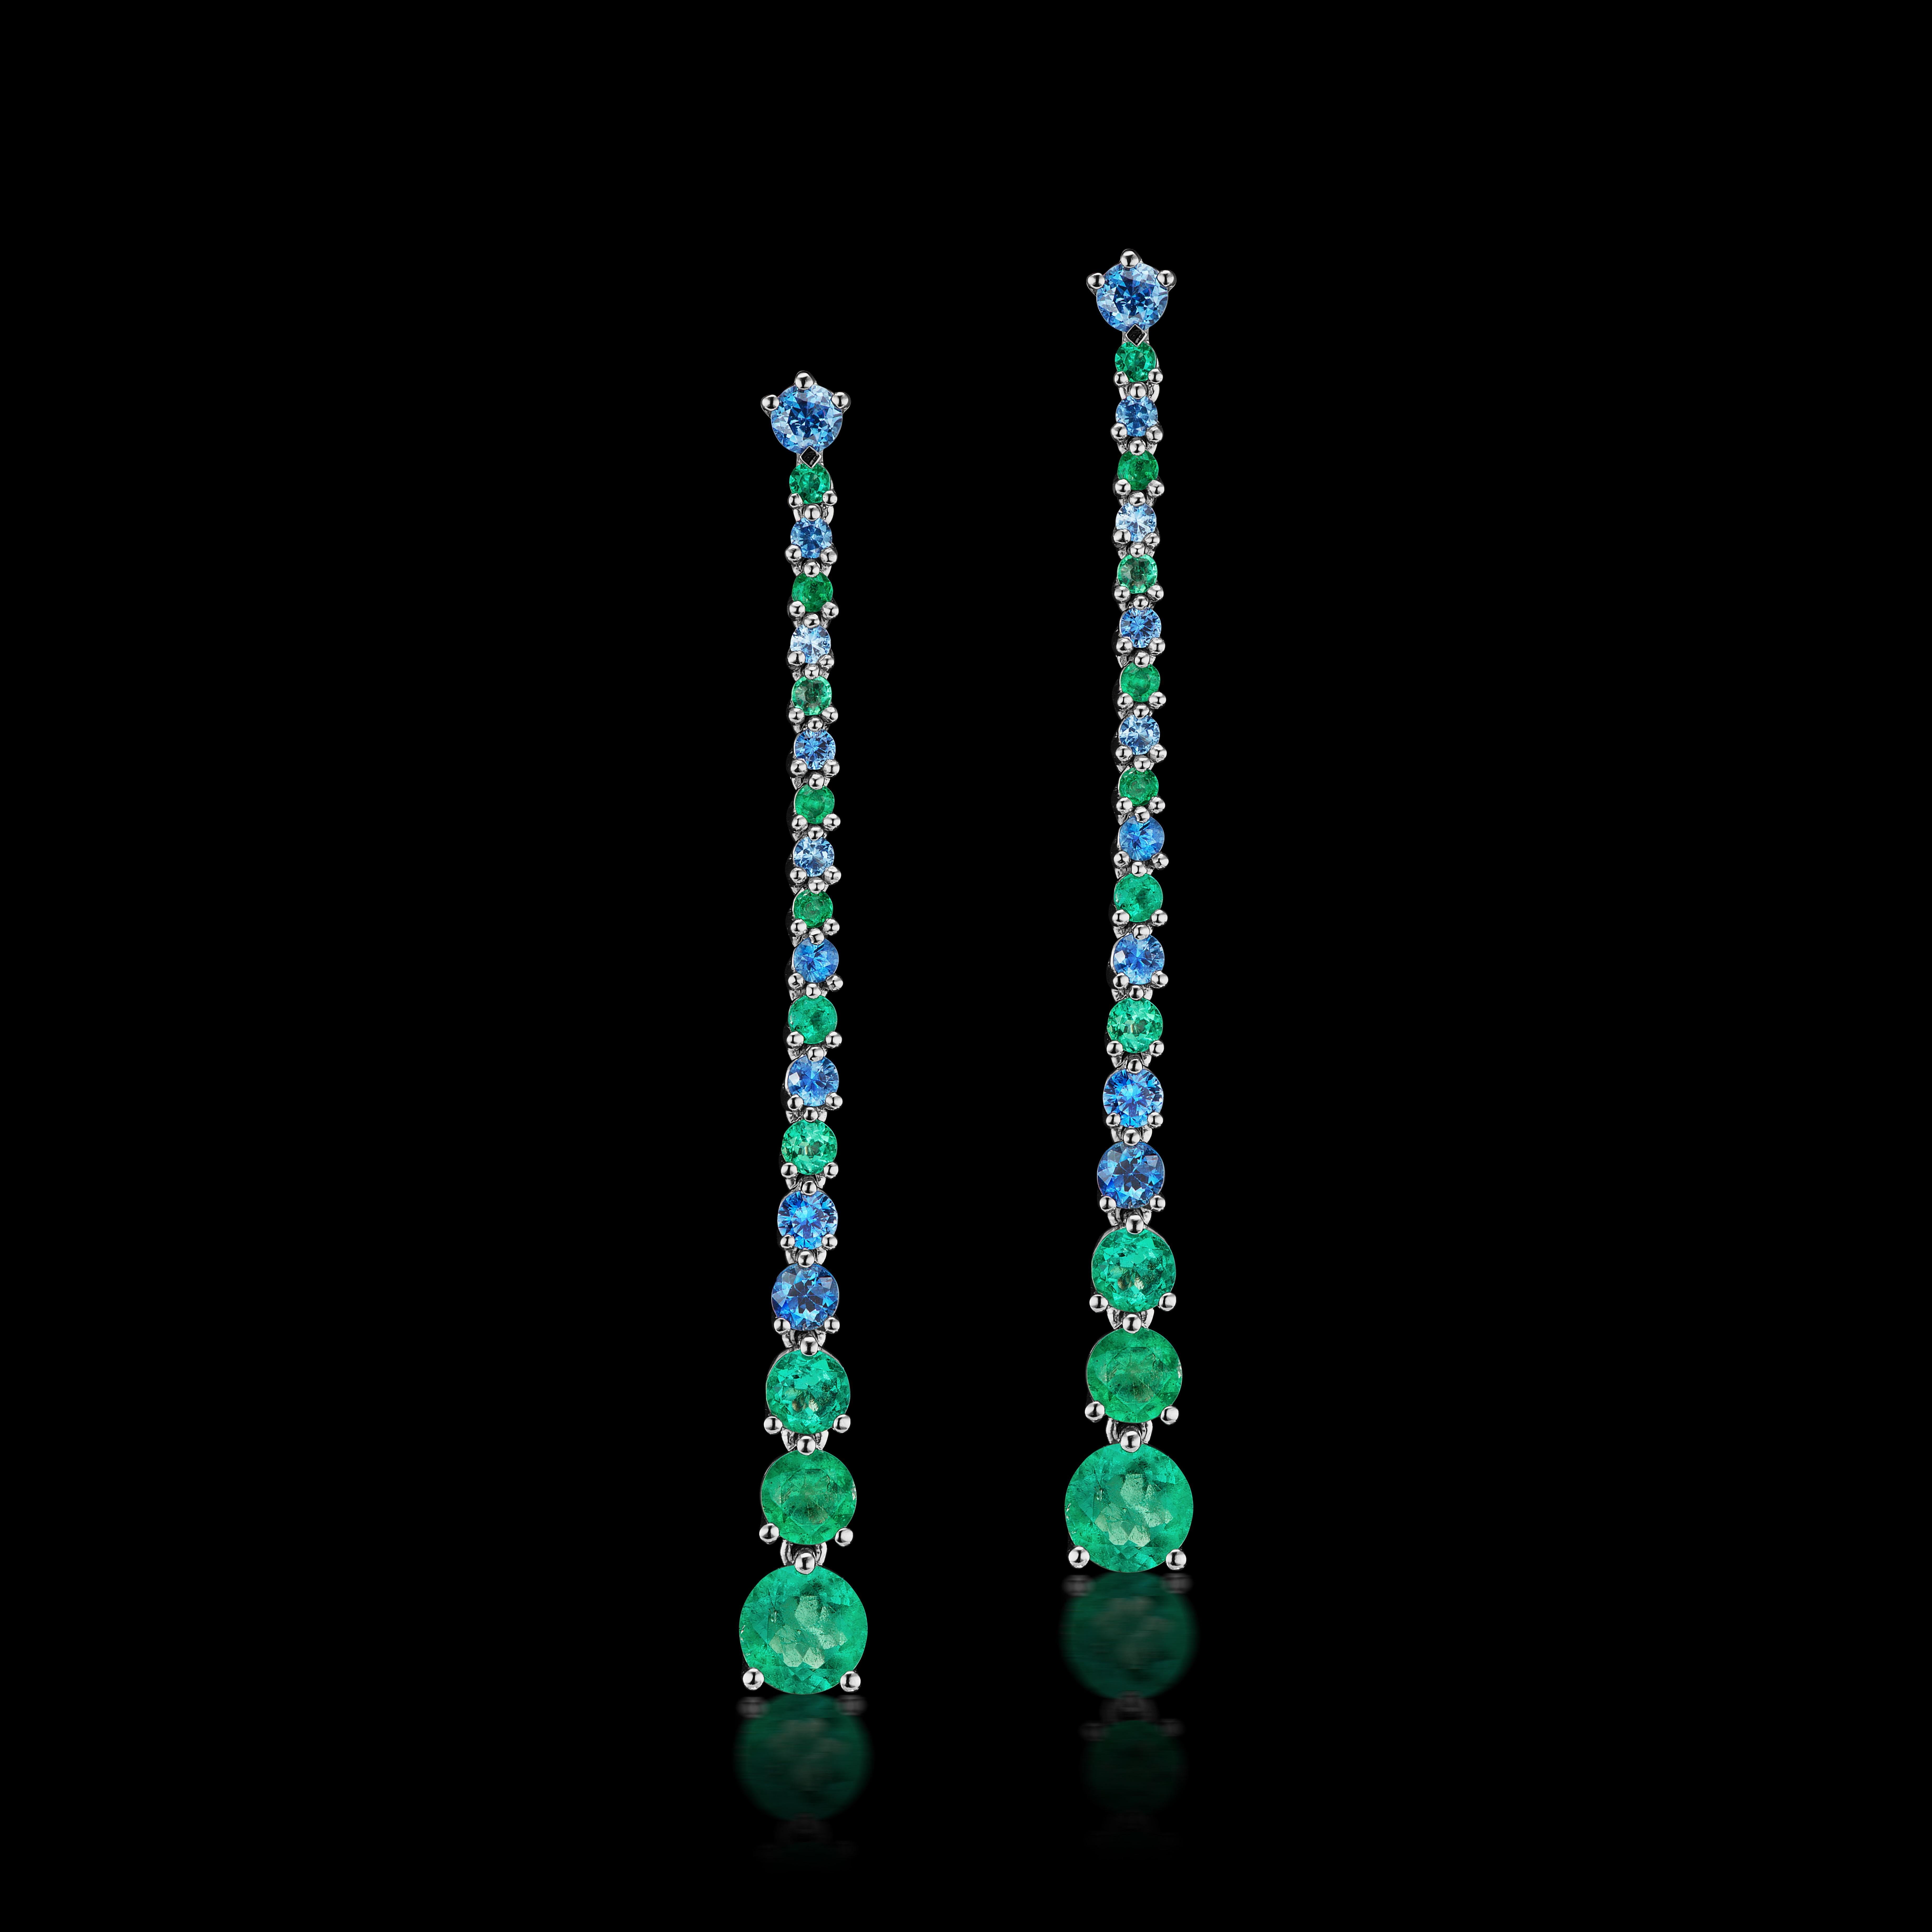 Round Cut JAG New York Emerald and Sapphire Drop Earrings set in Platinum